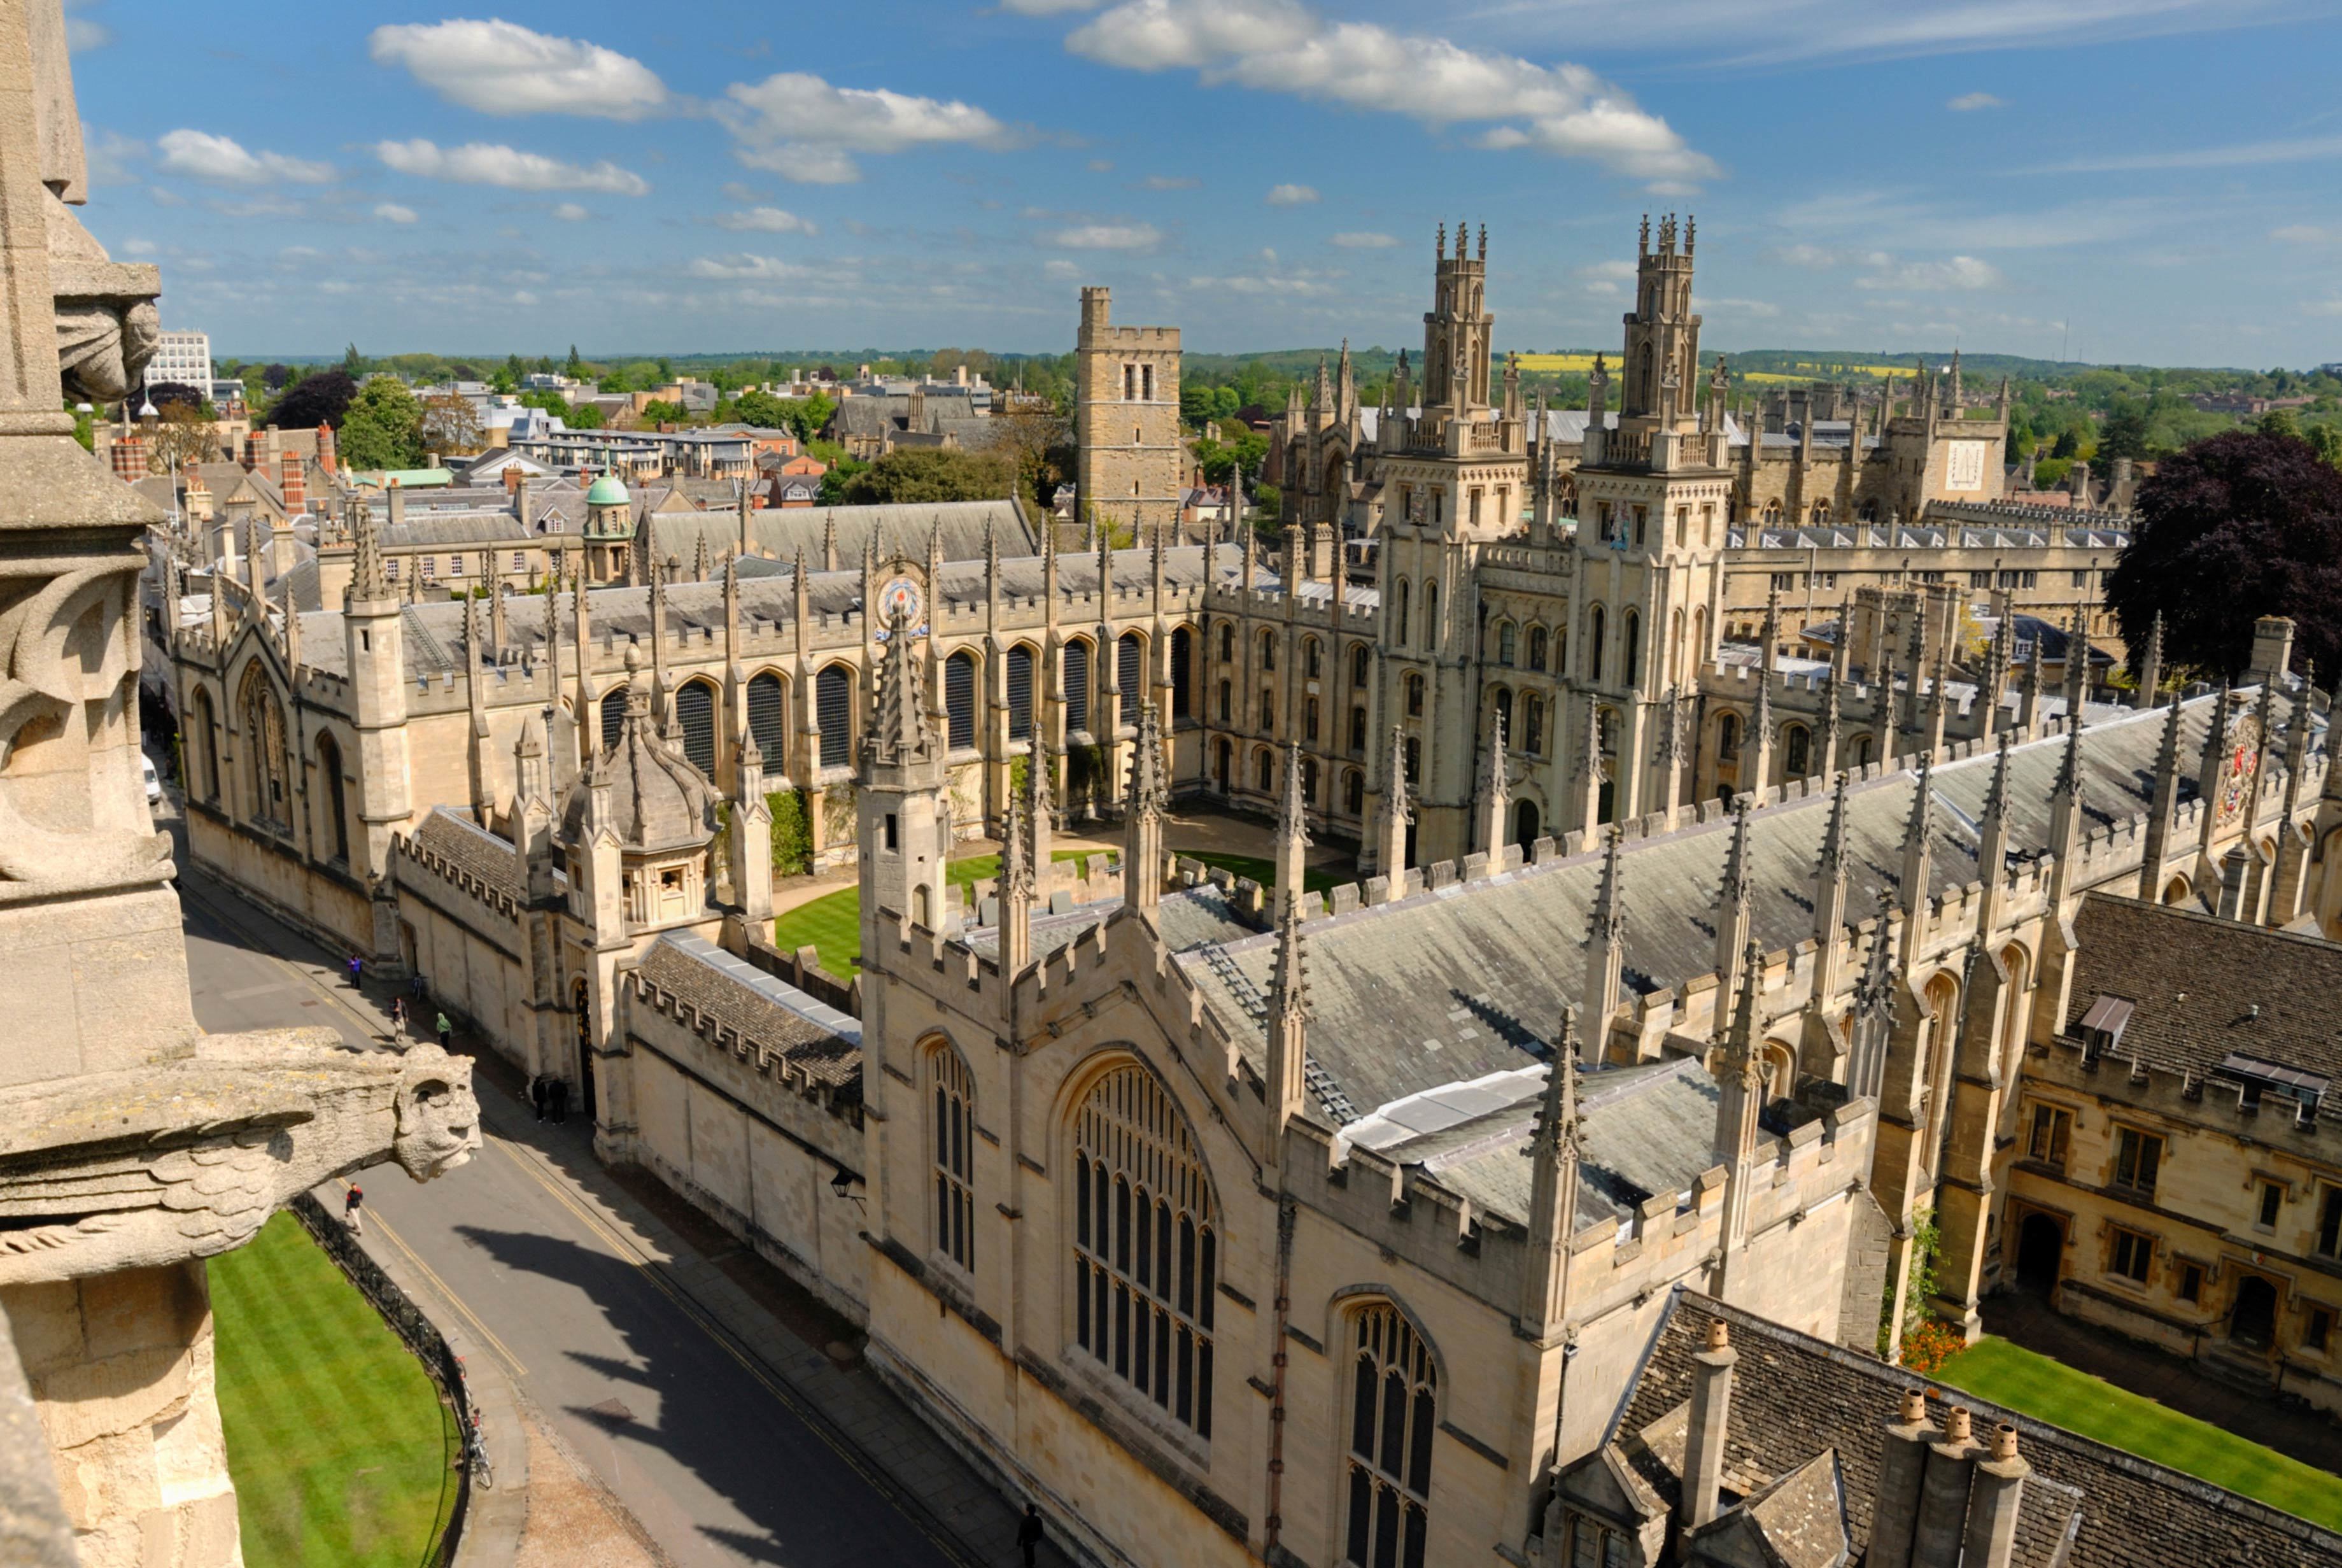 Applying to Oxford or Cambridge? Here's what you need to know